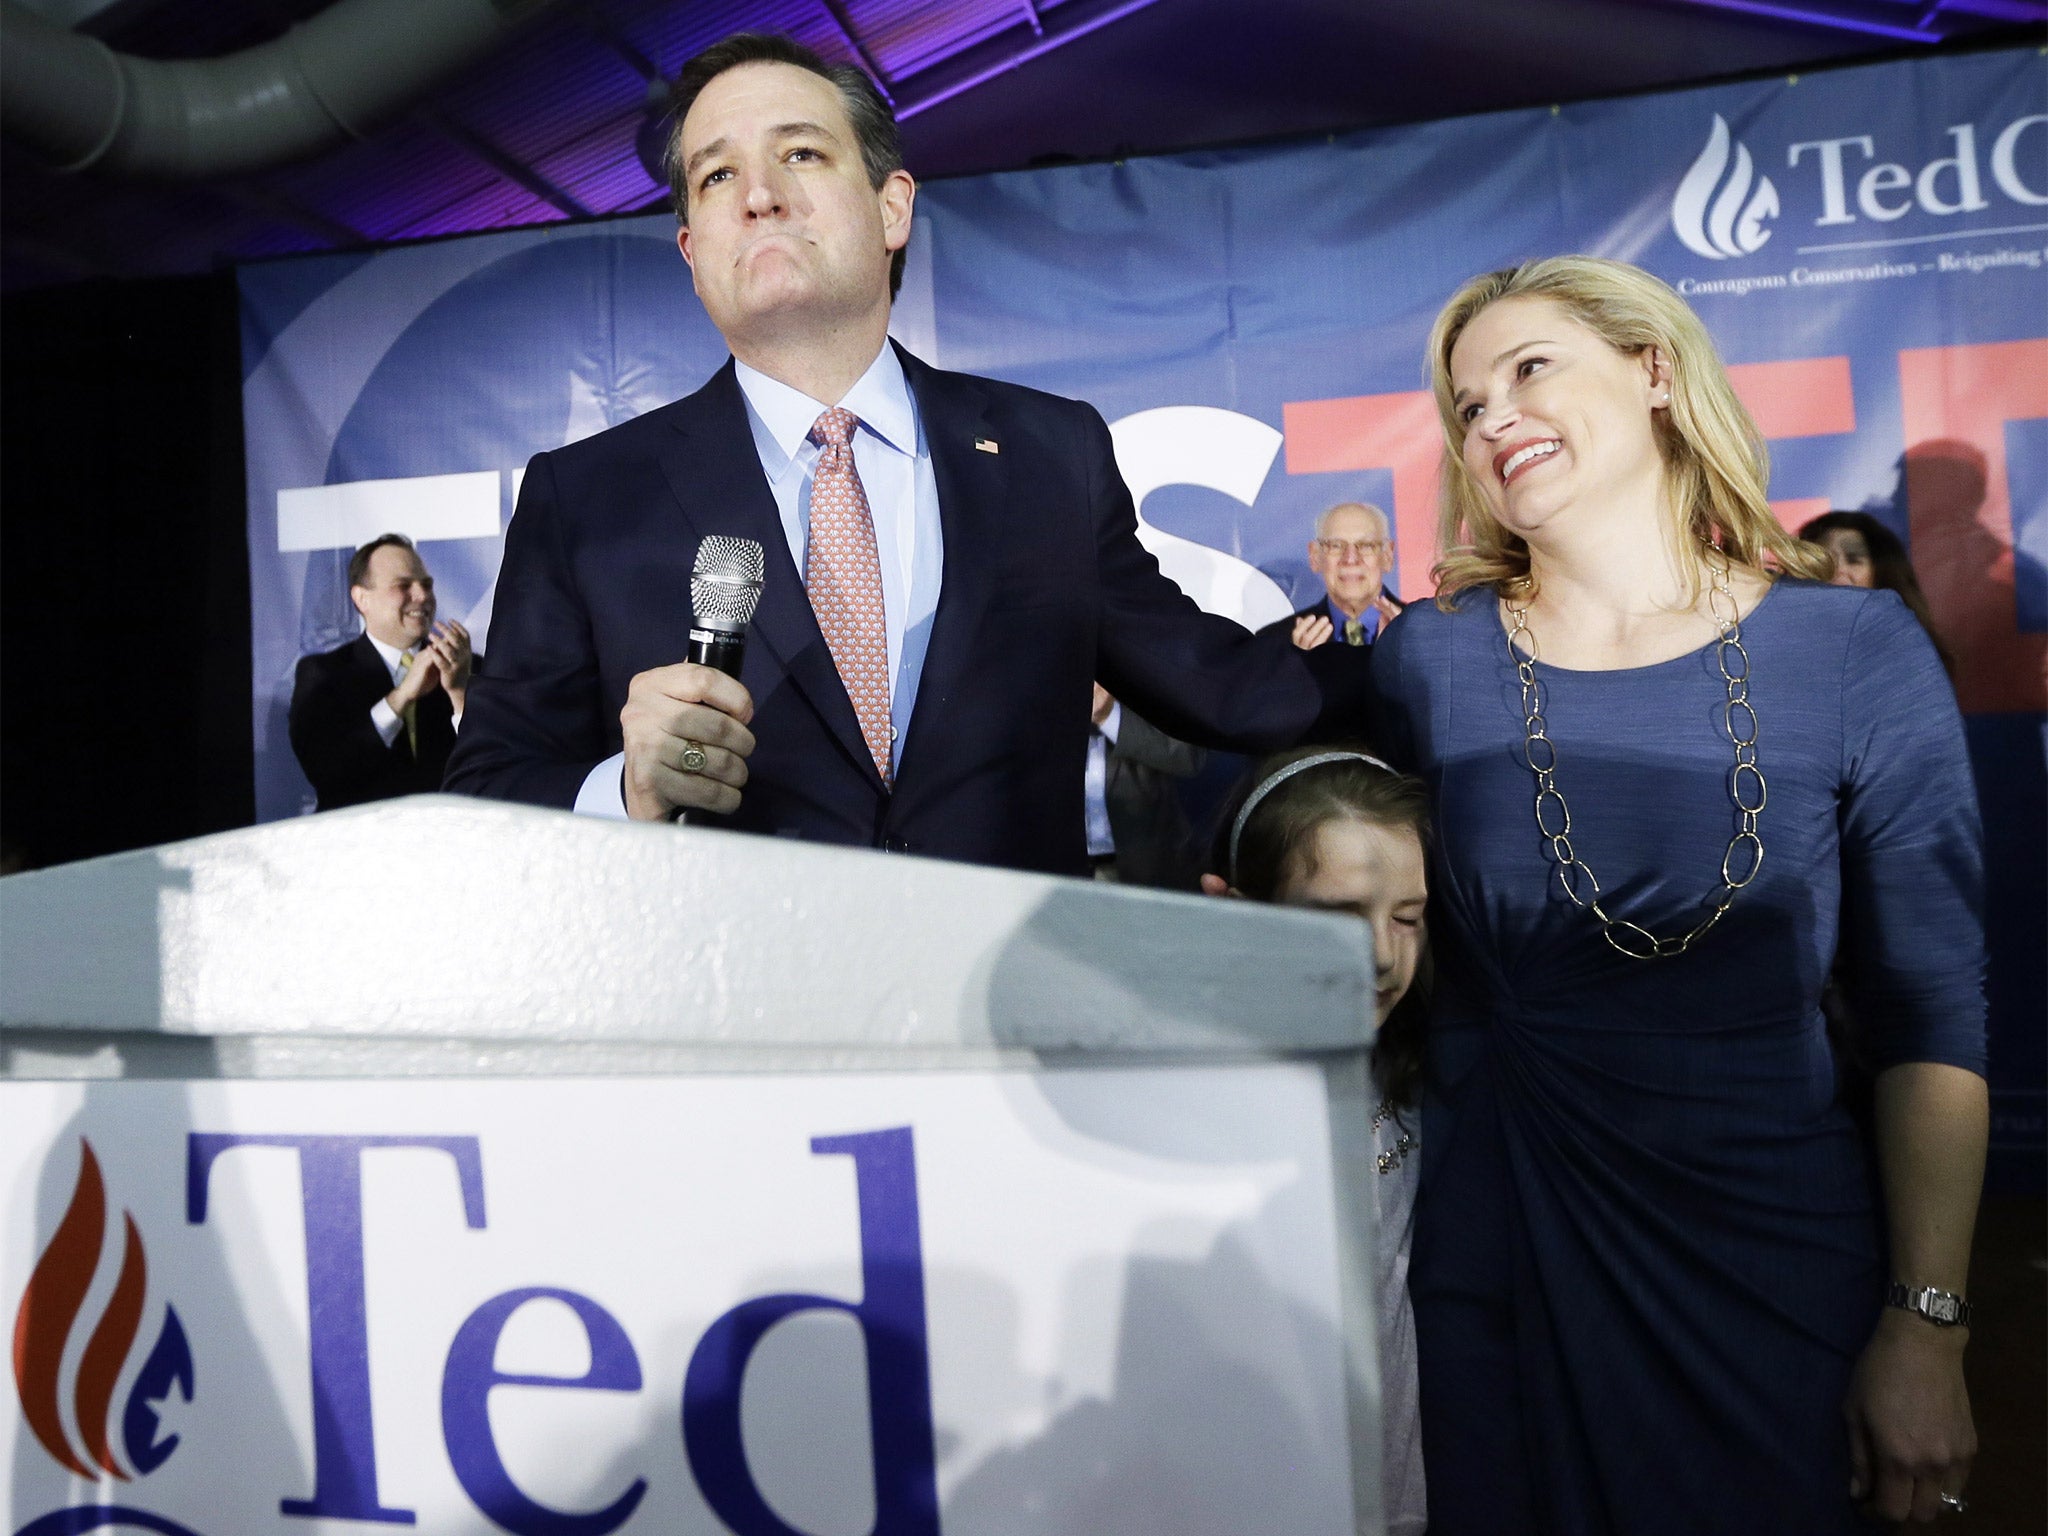 Senator Ted Cruz at a caucus night rally on Monday with his wife in Des Moines, Iowa